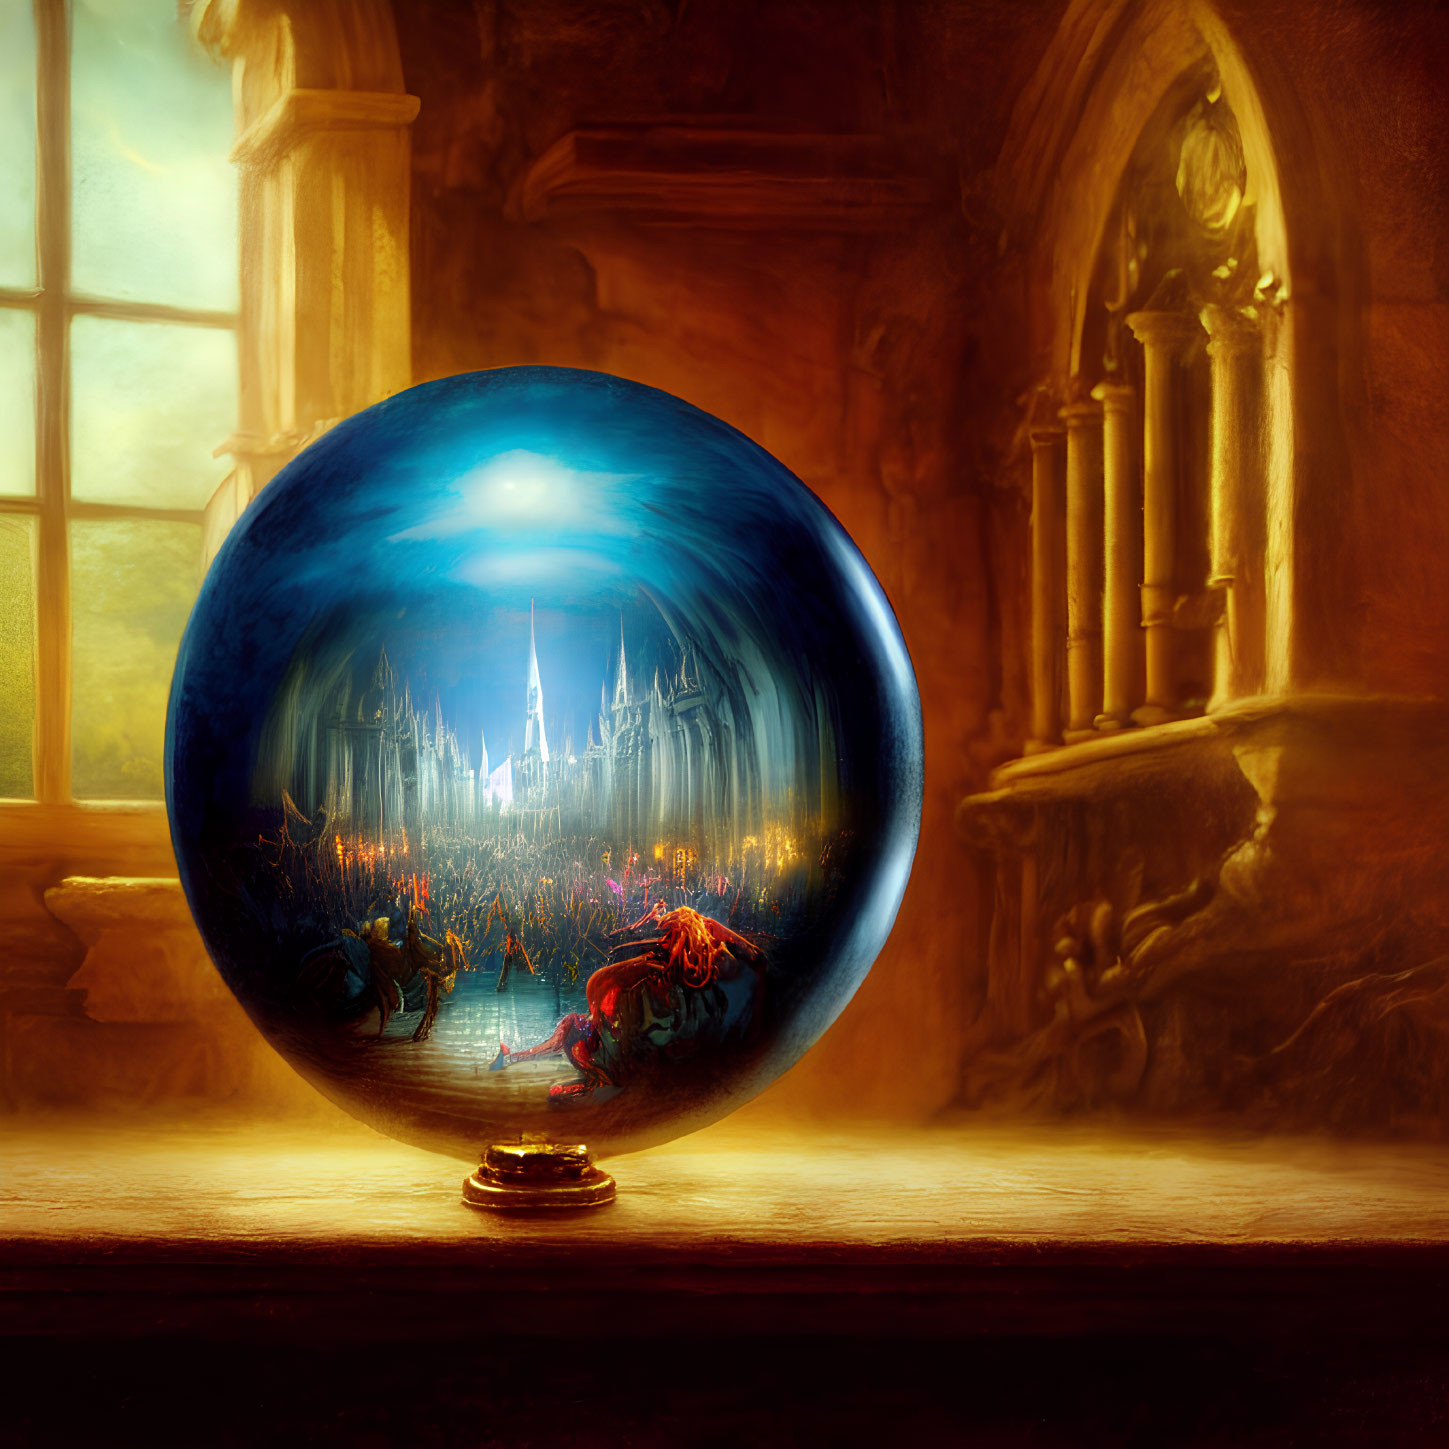 Crystal ball displays vibrant fantasy cityscape in sunlit room